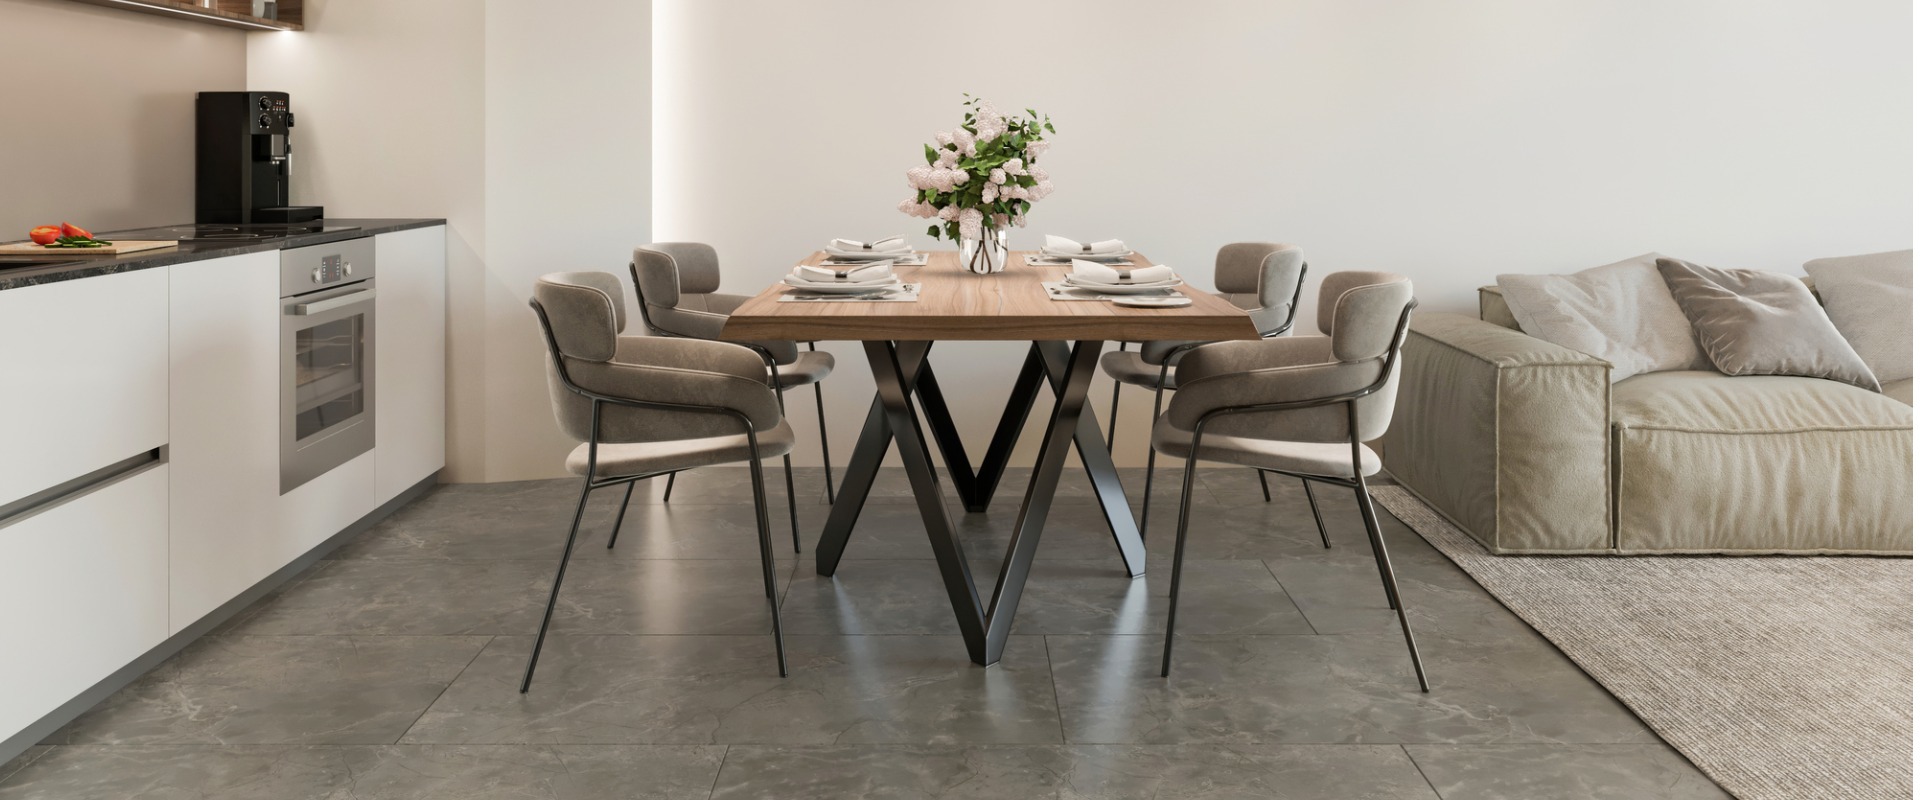 Domestic Dining Table Frames Header Image